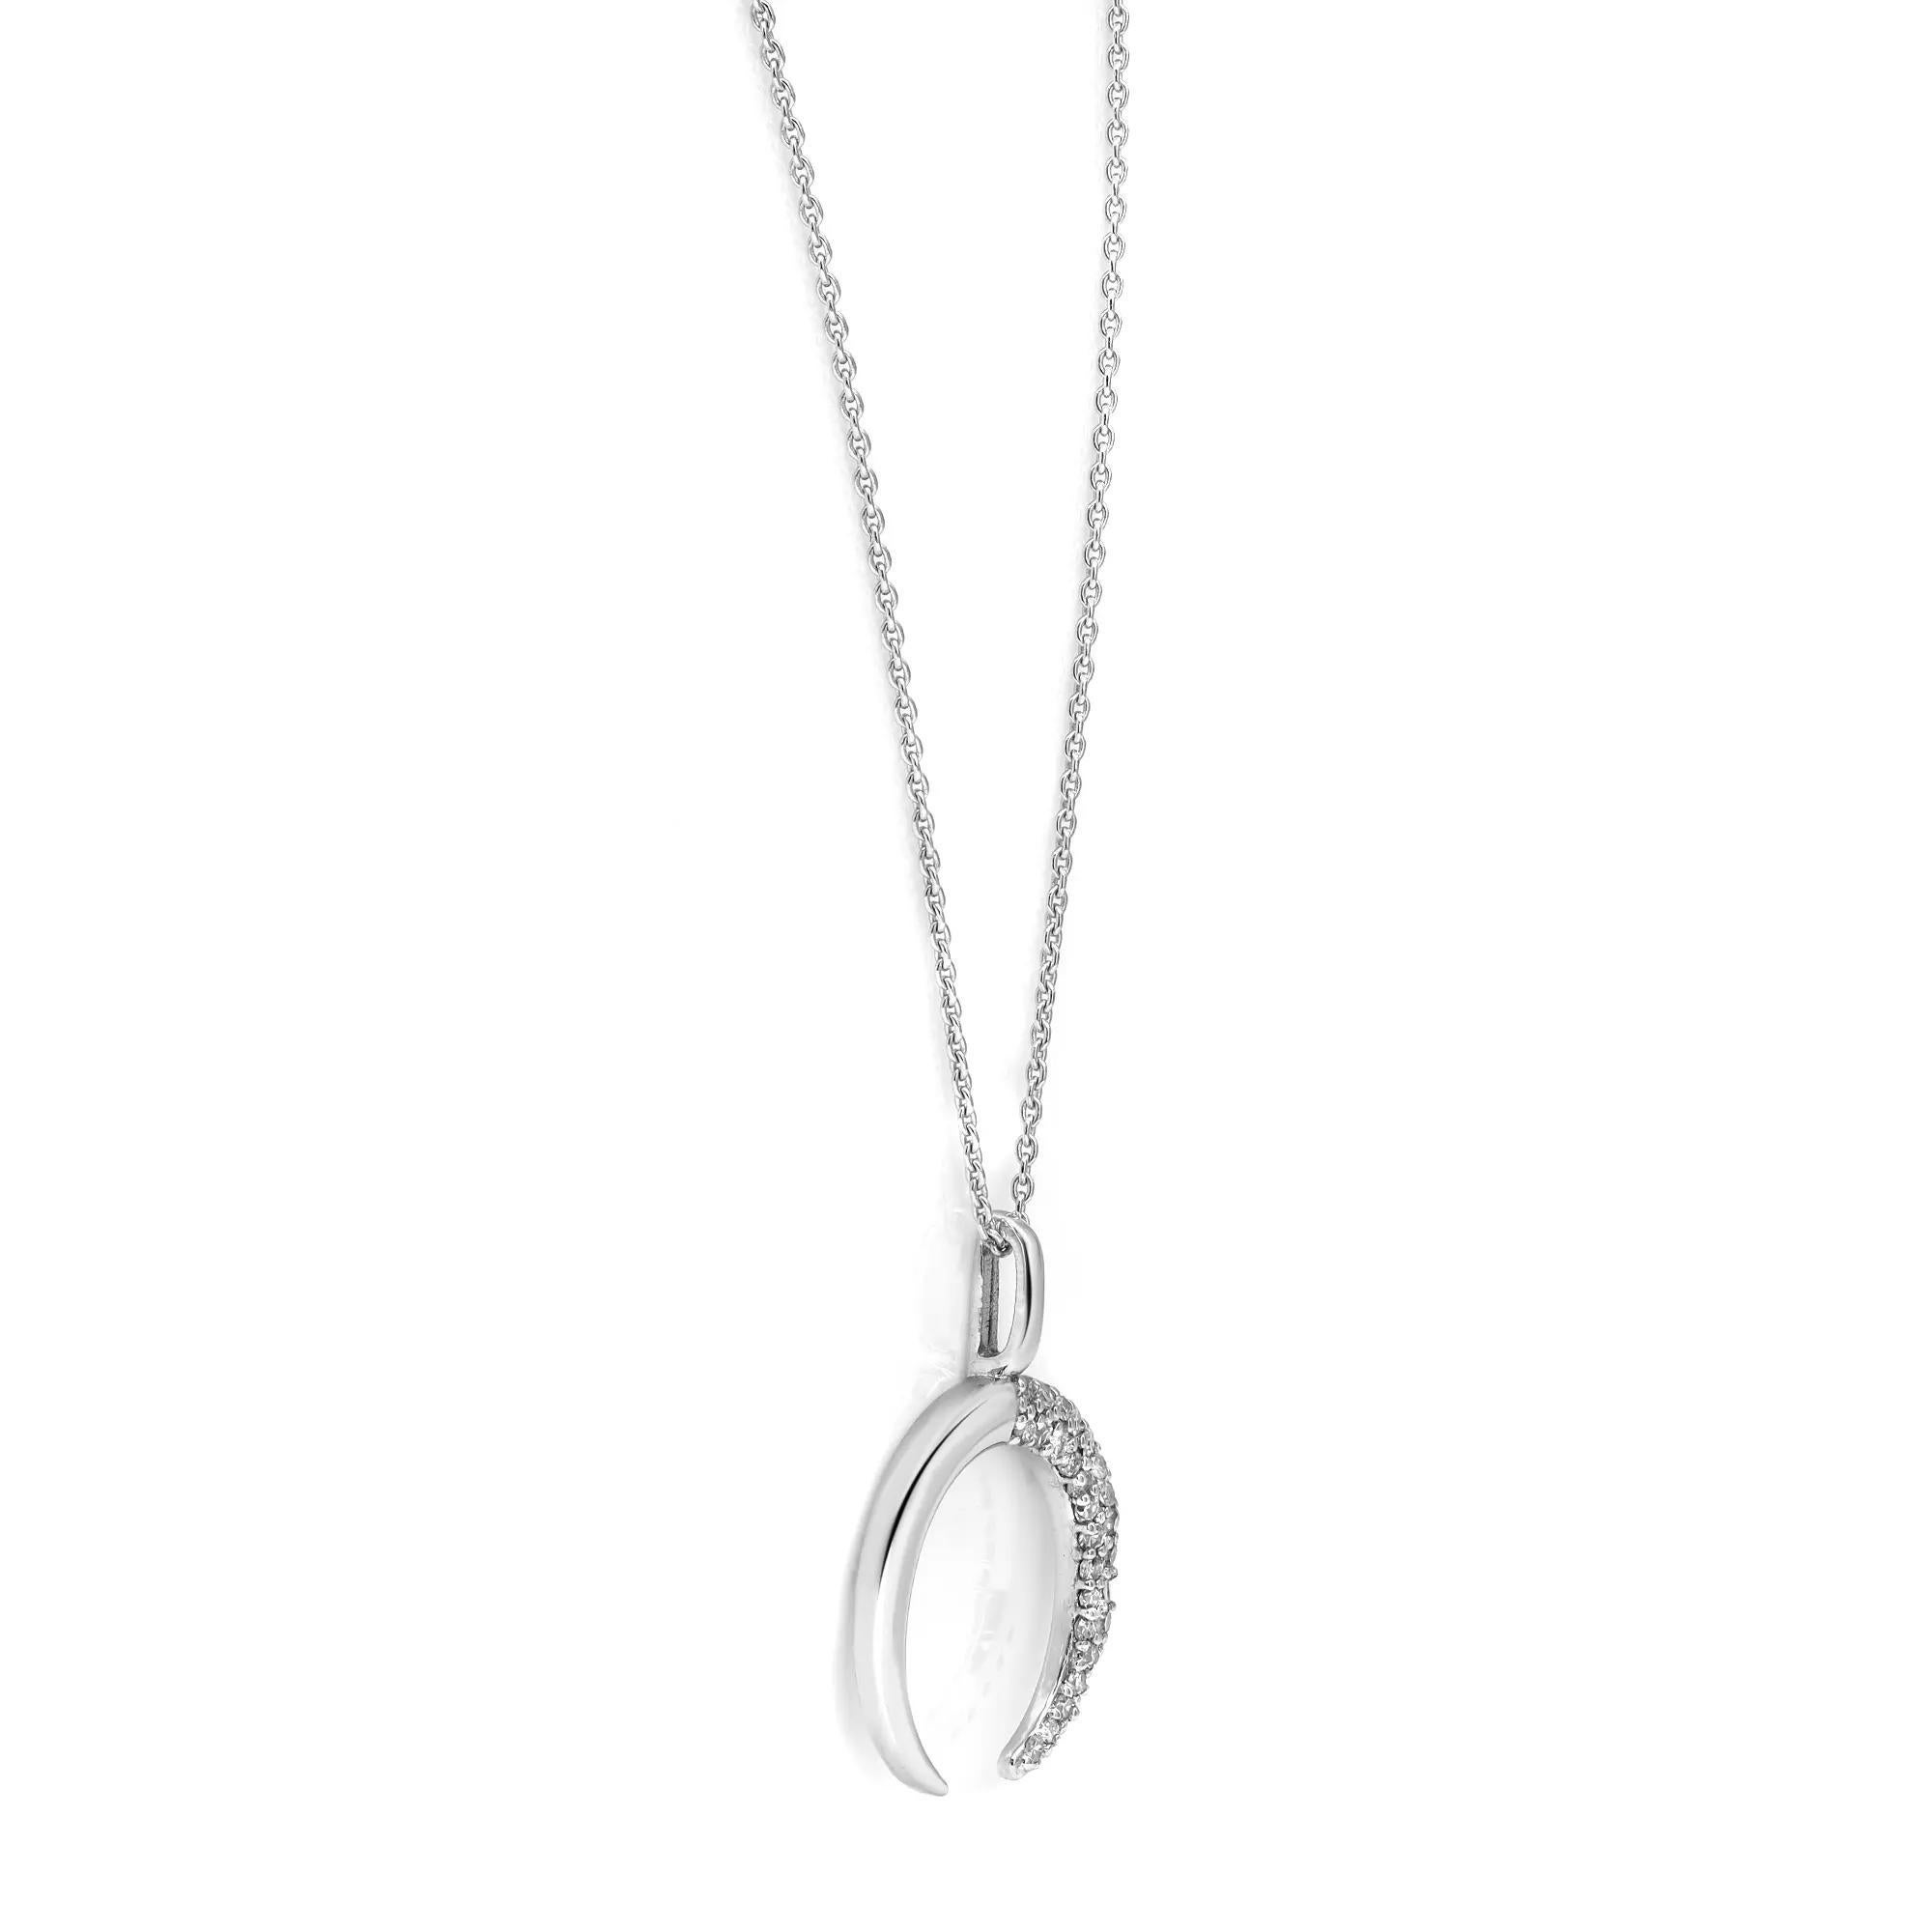 This cute and delicate crescent moon pendant necklace is crafted in 14K white gold. Encrusted with 0.10 carat of tiny round cut diamonds. Diamond color I and SI clarity. Chain length: 18 inches. Pendant Size: 12.8mm. Total weight: 1.94 grams. Makes